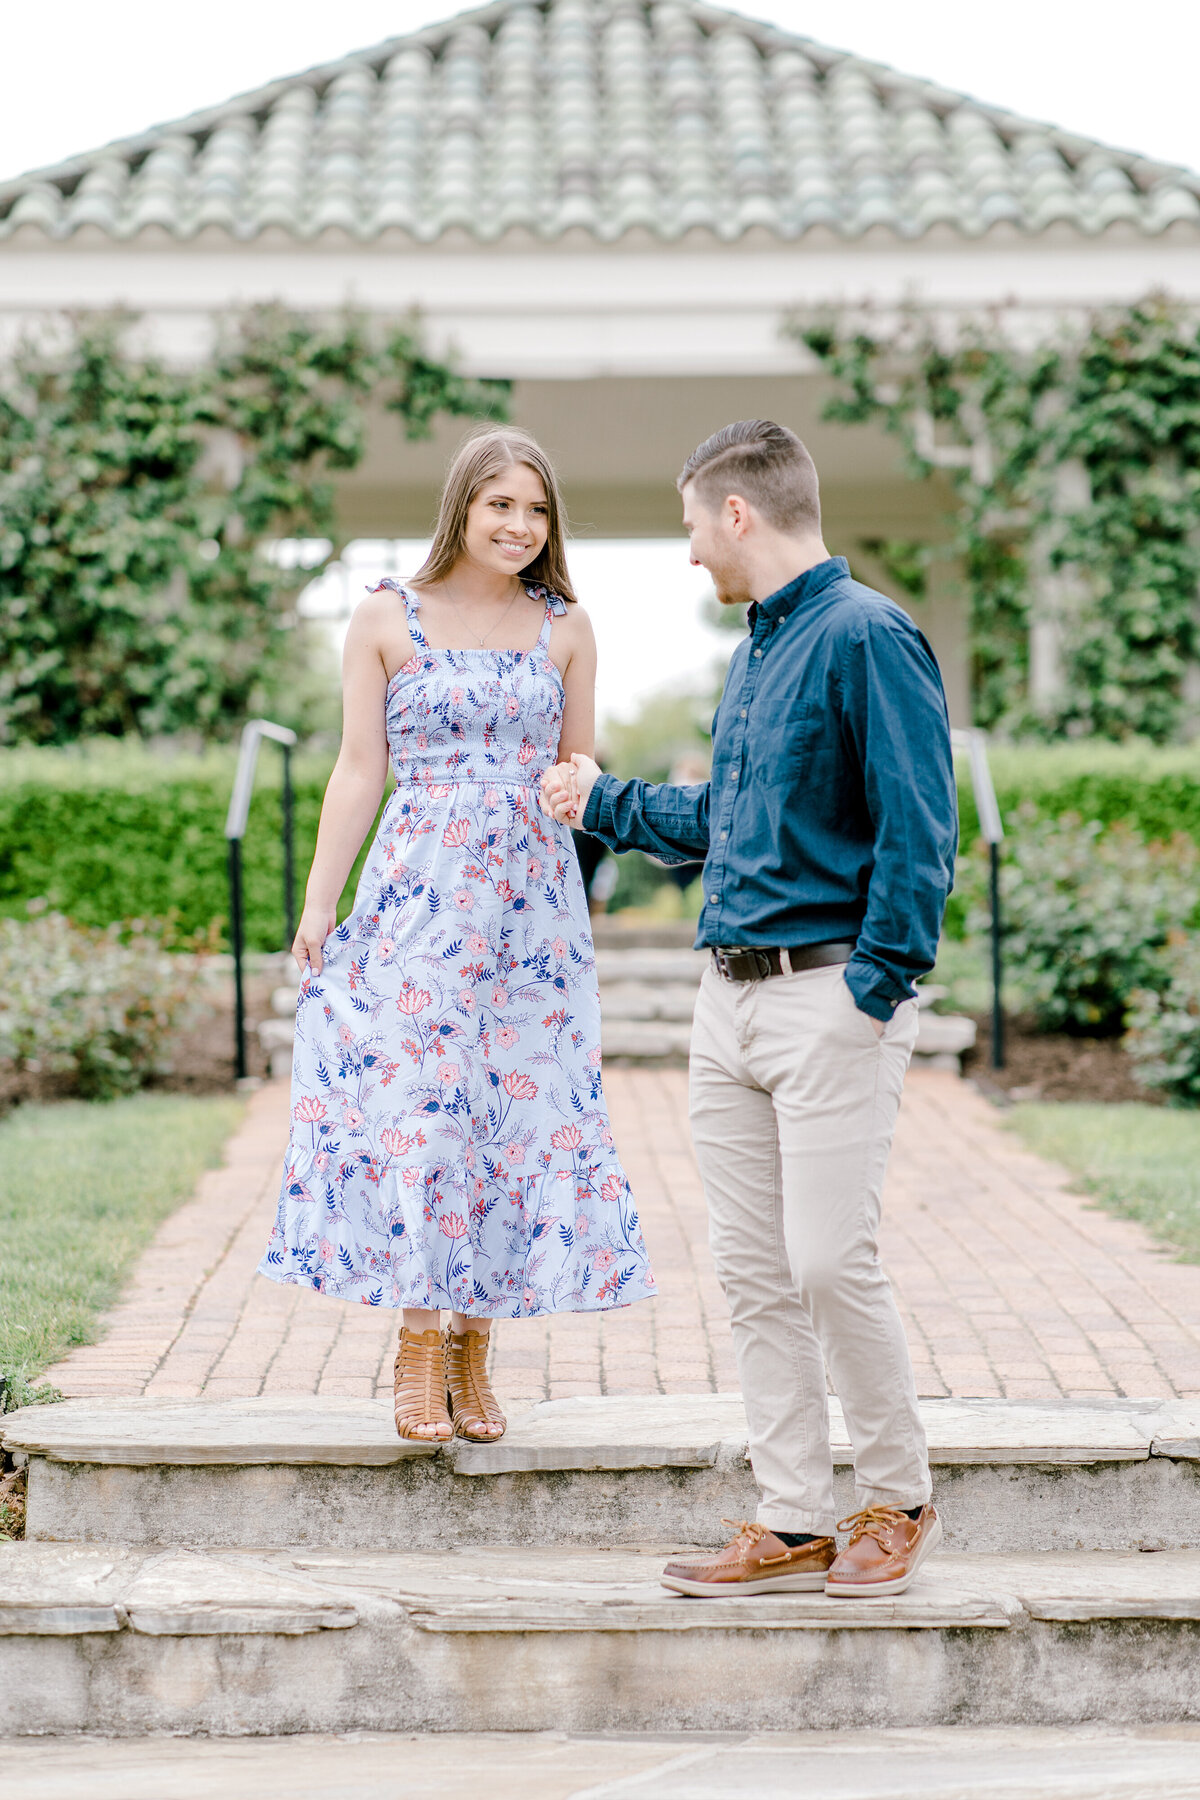 Hershey Garden Engagement Session Photography Photo-51